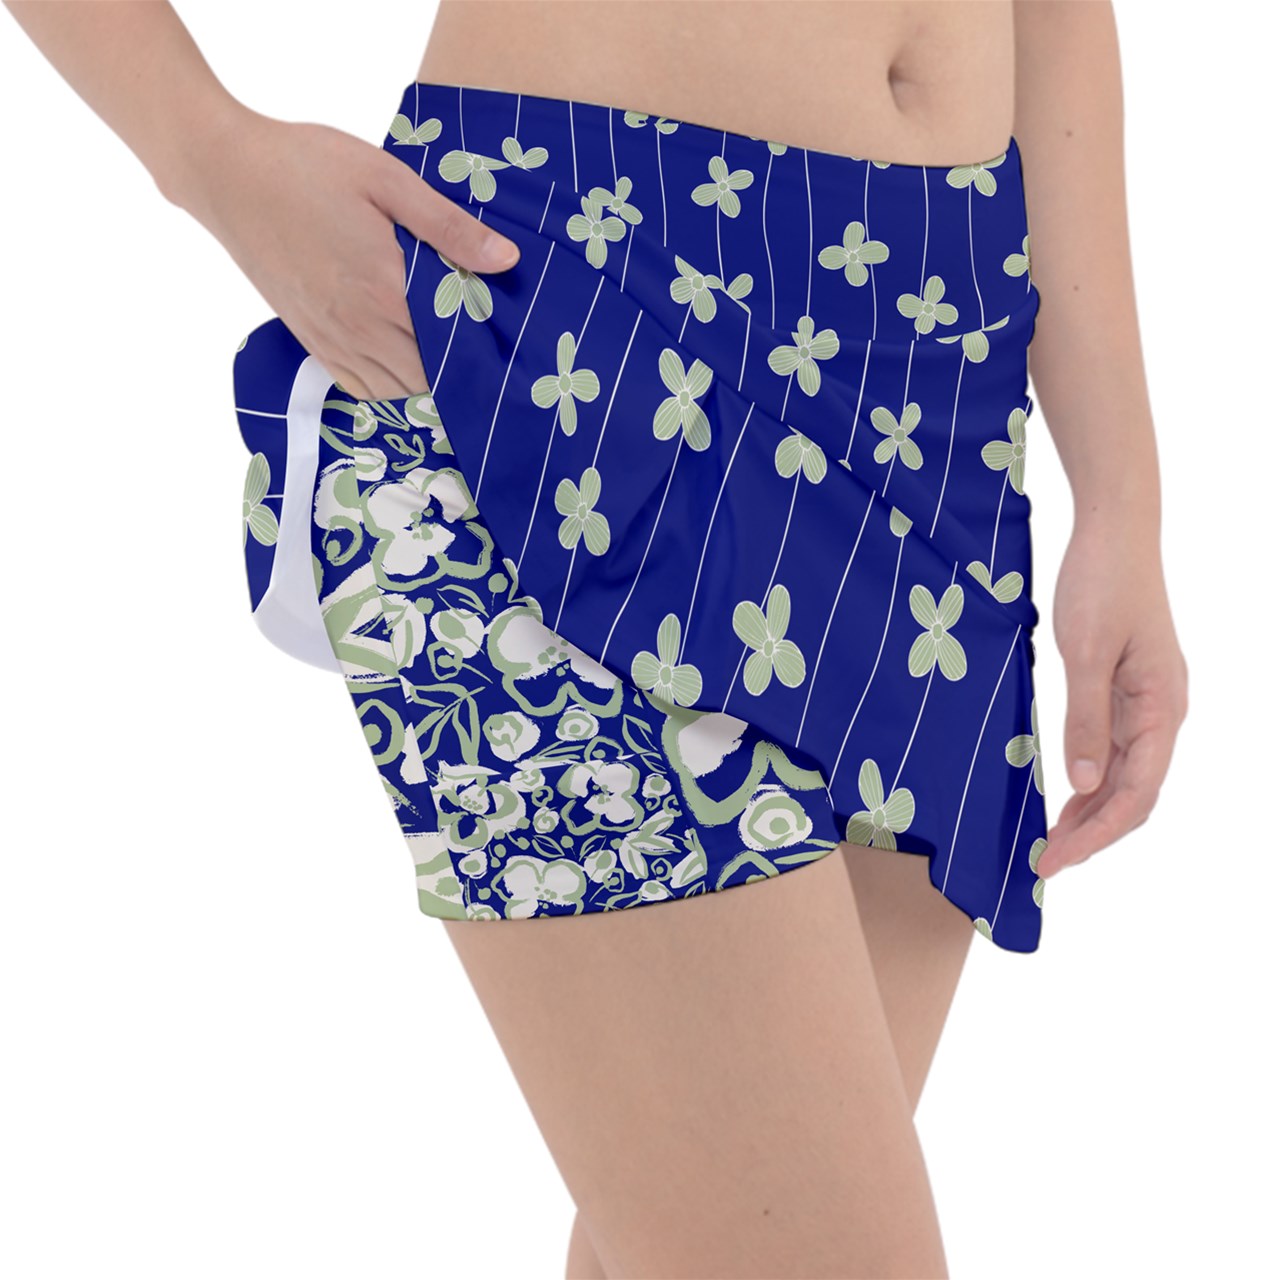 Dizzy Pickle Lesia Blossom BSC Women's Pickleball Classic Skort with Inner Shorts and Pockets